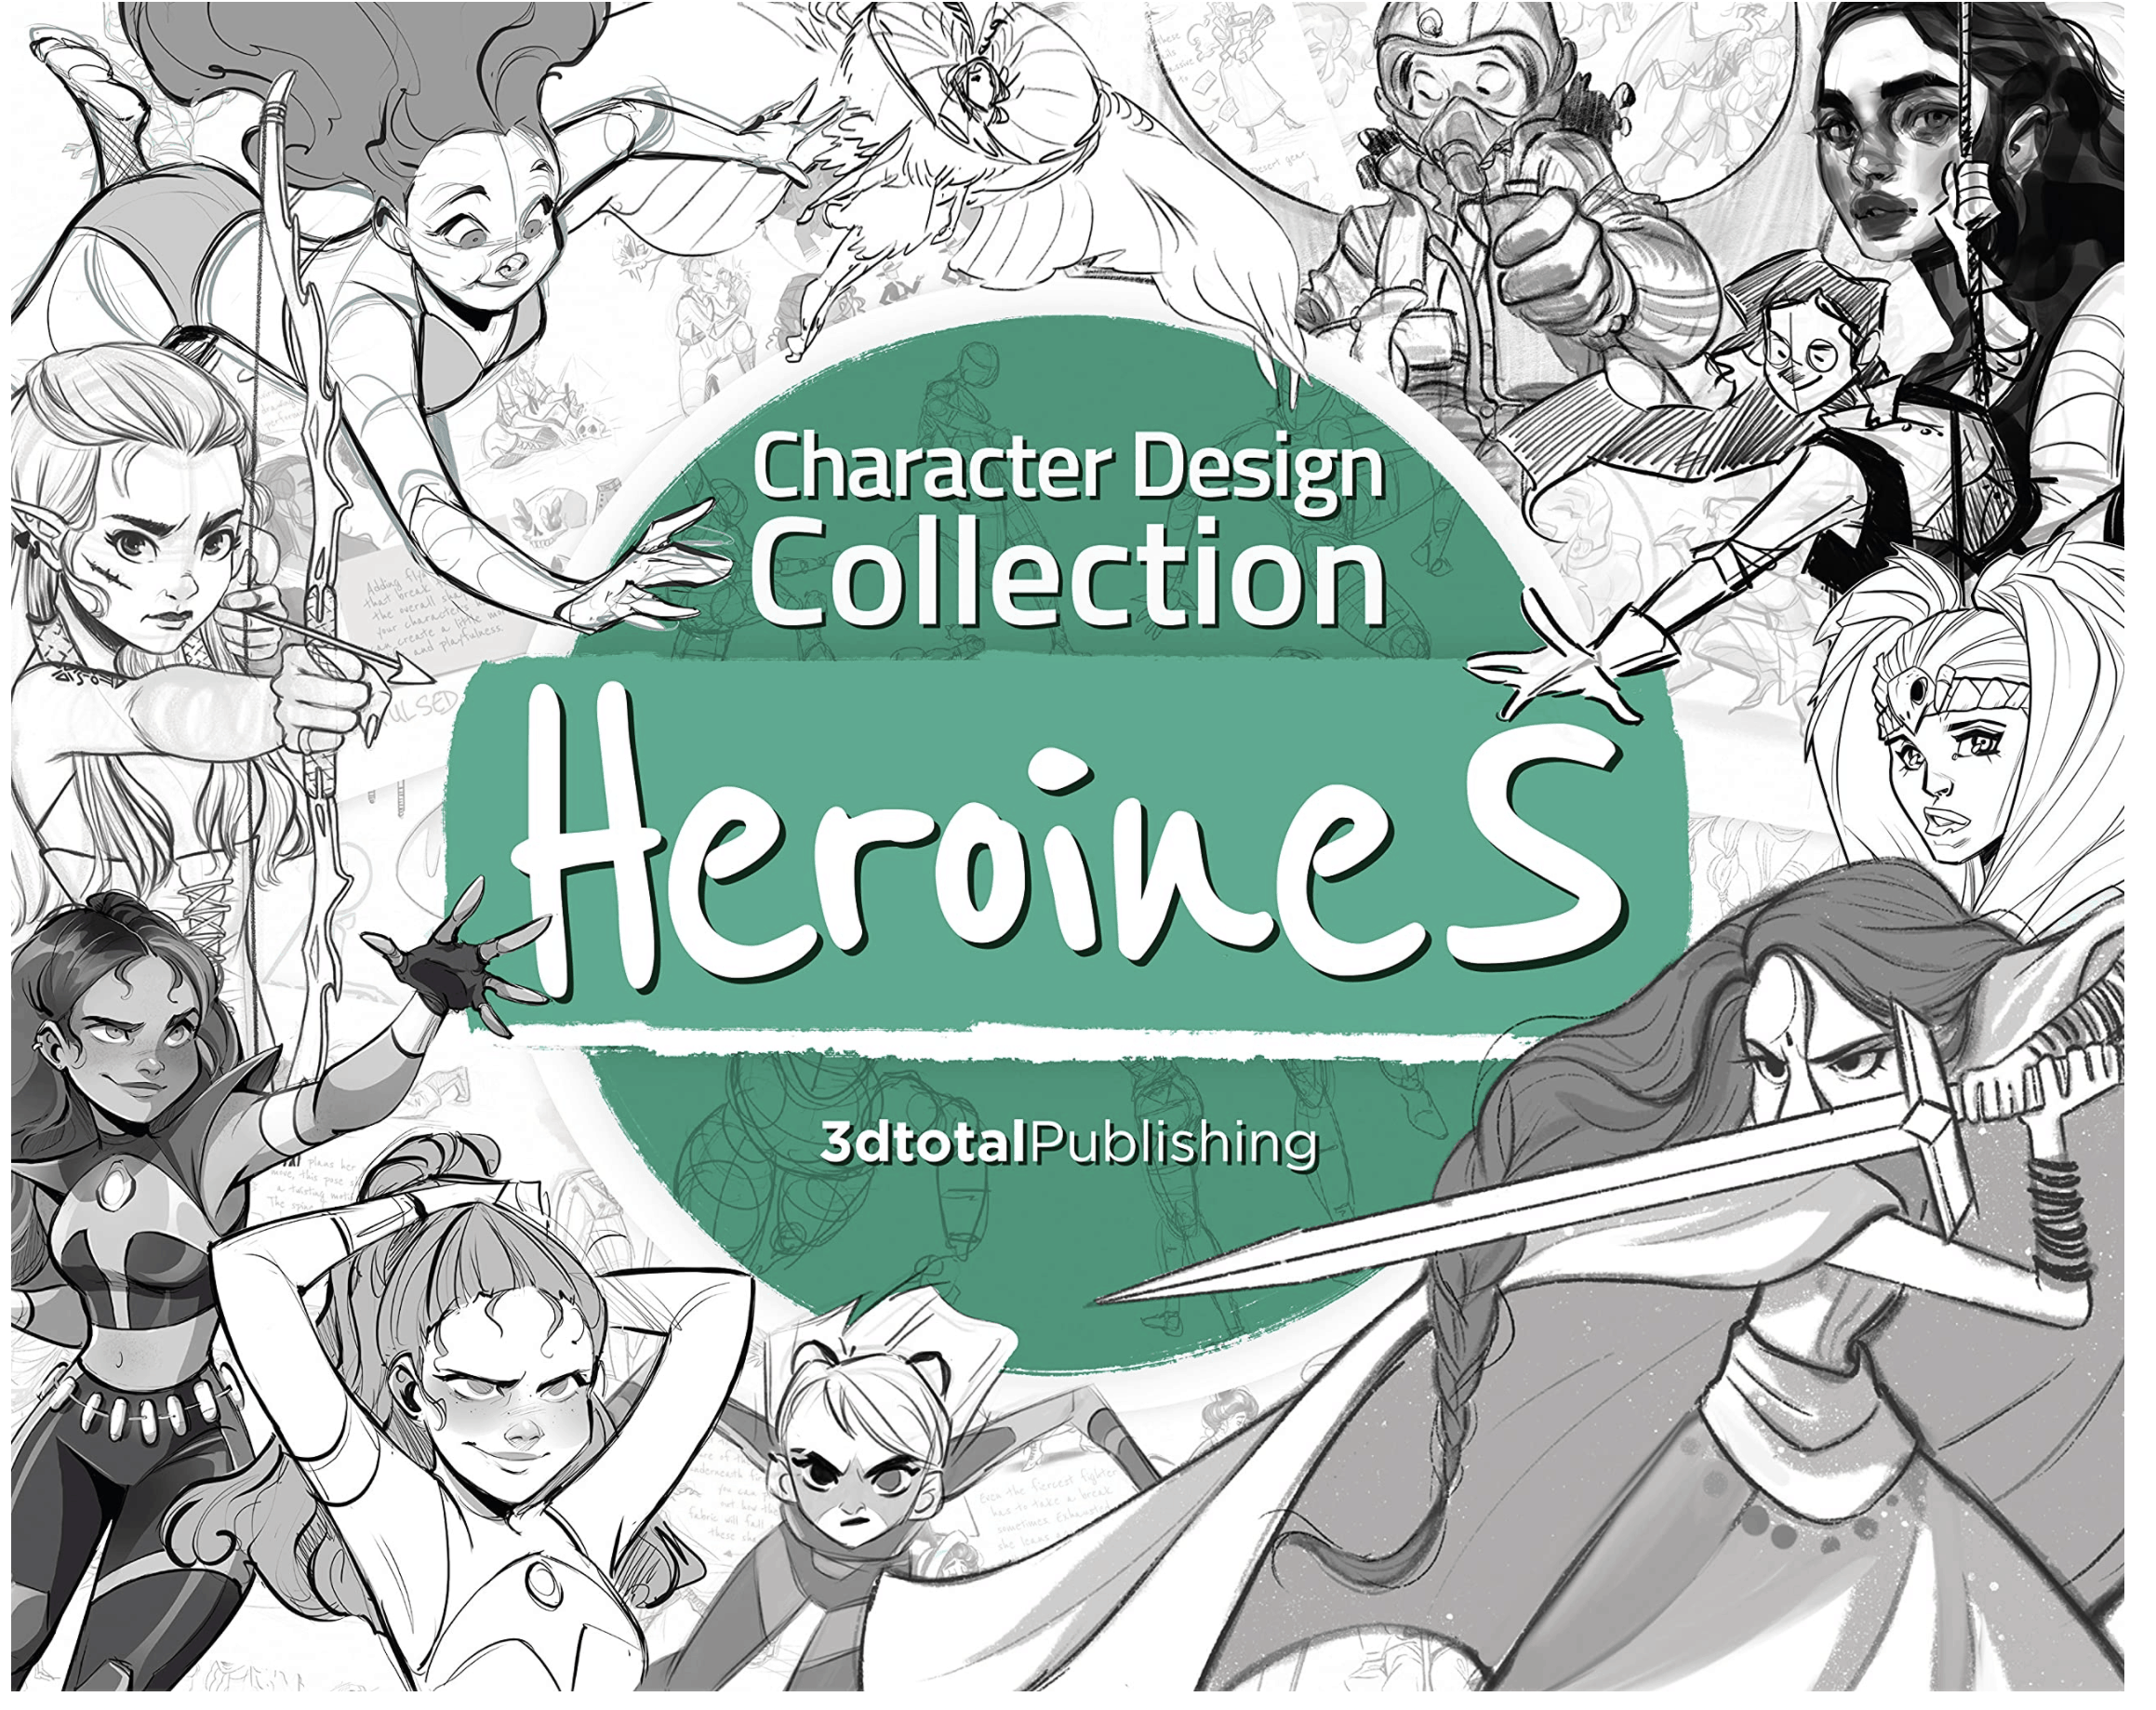 A book filled with heroines by artists who have undertaken multiple drawing projects